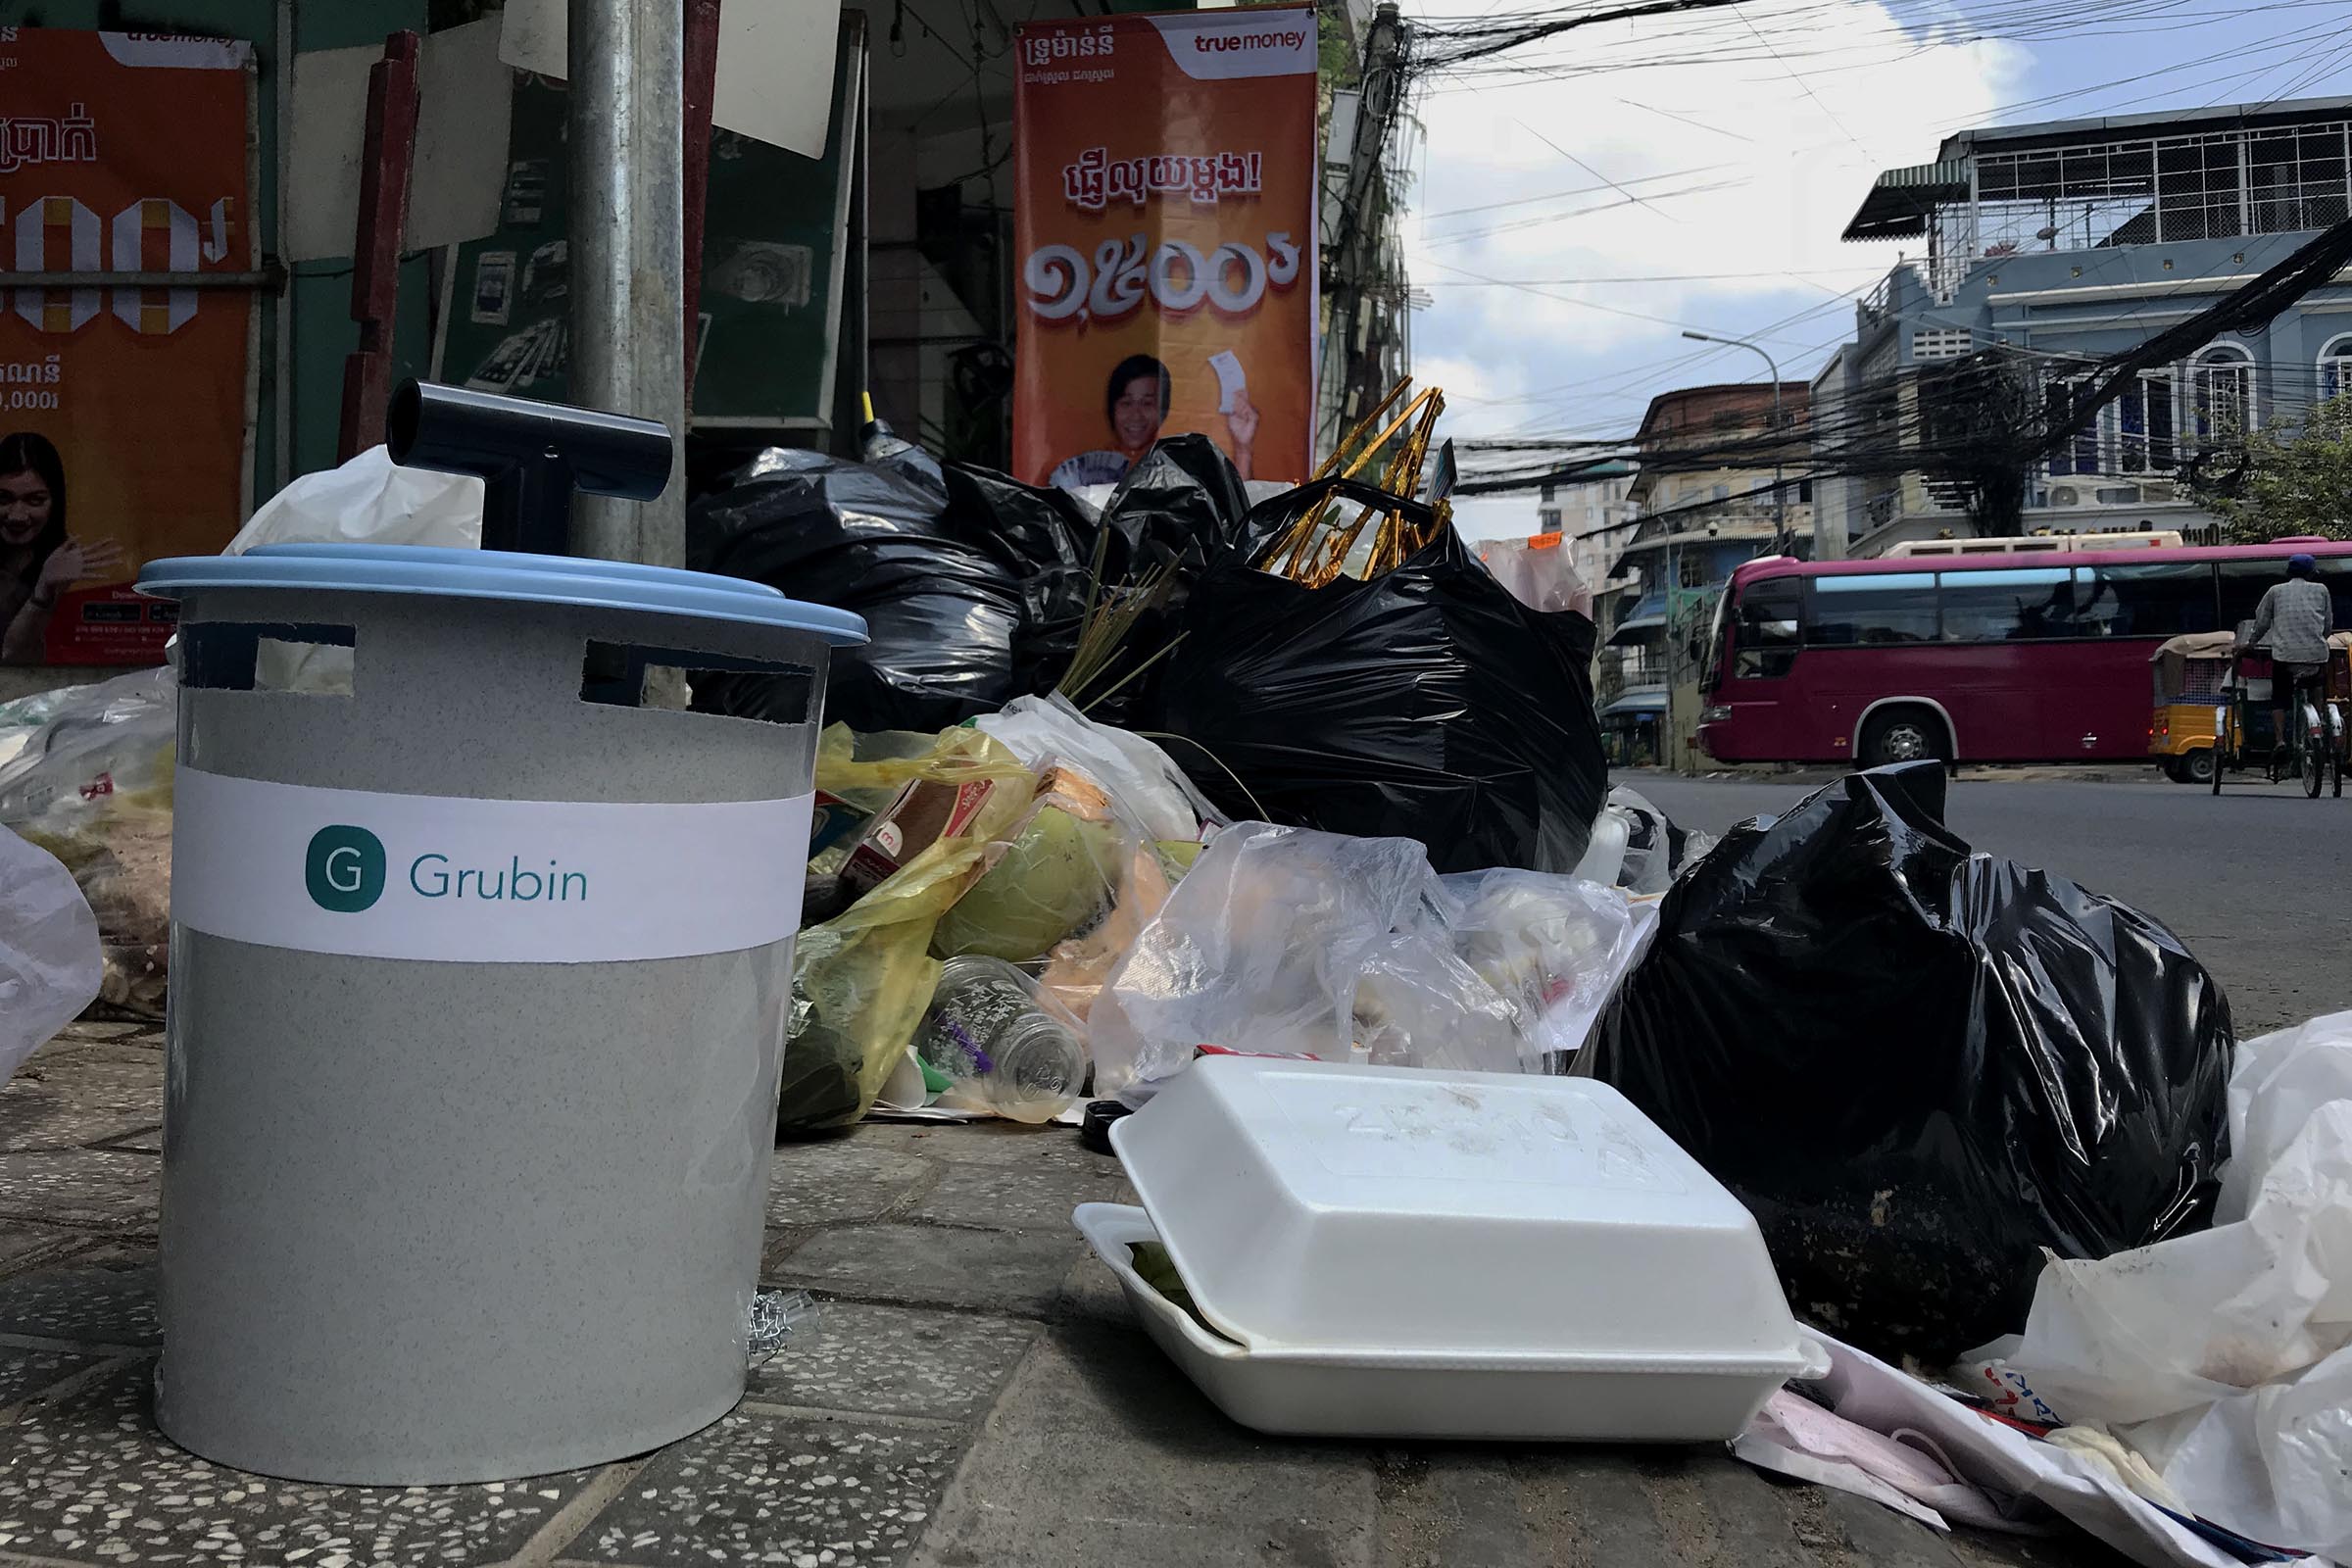 A Grubin in front of a trash pile along a street in Phnom Penh, Cambodia